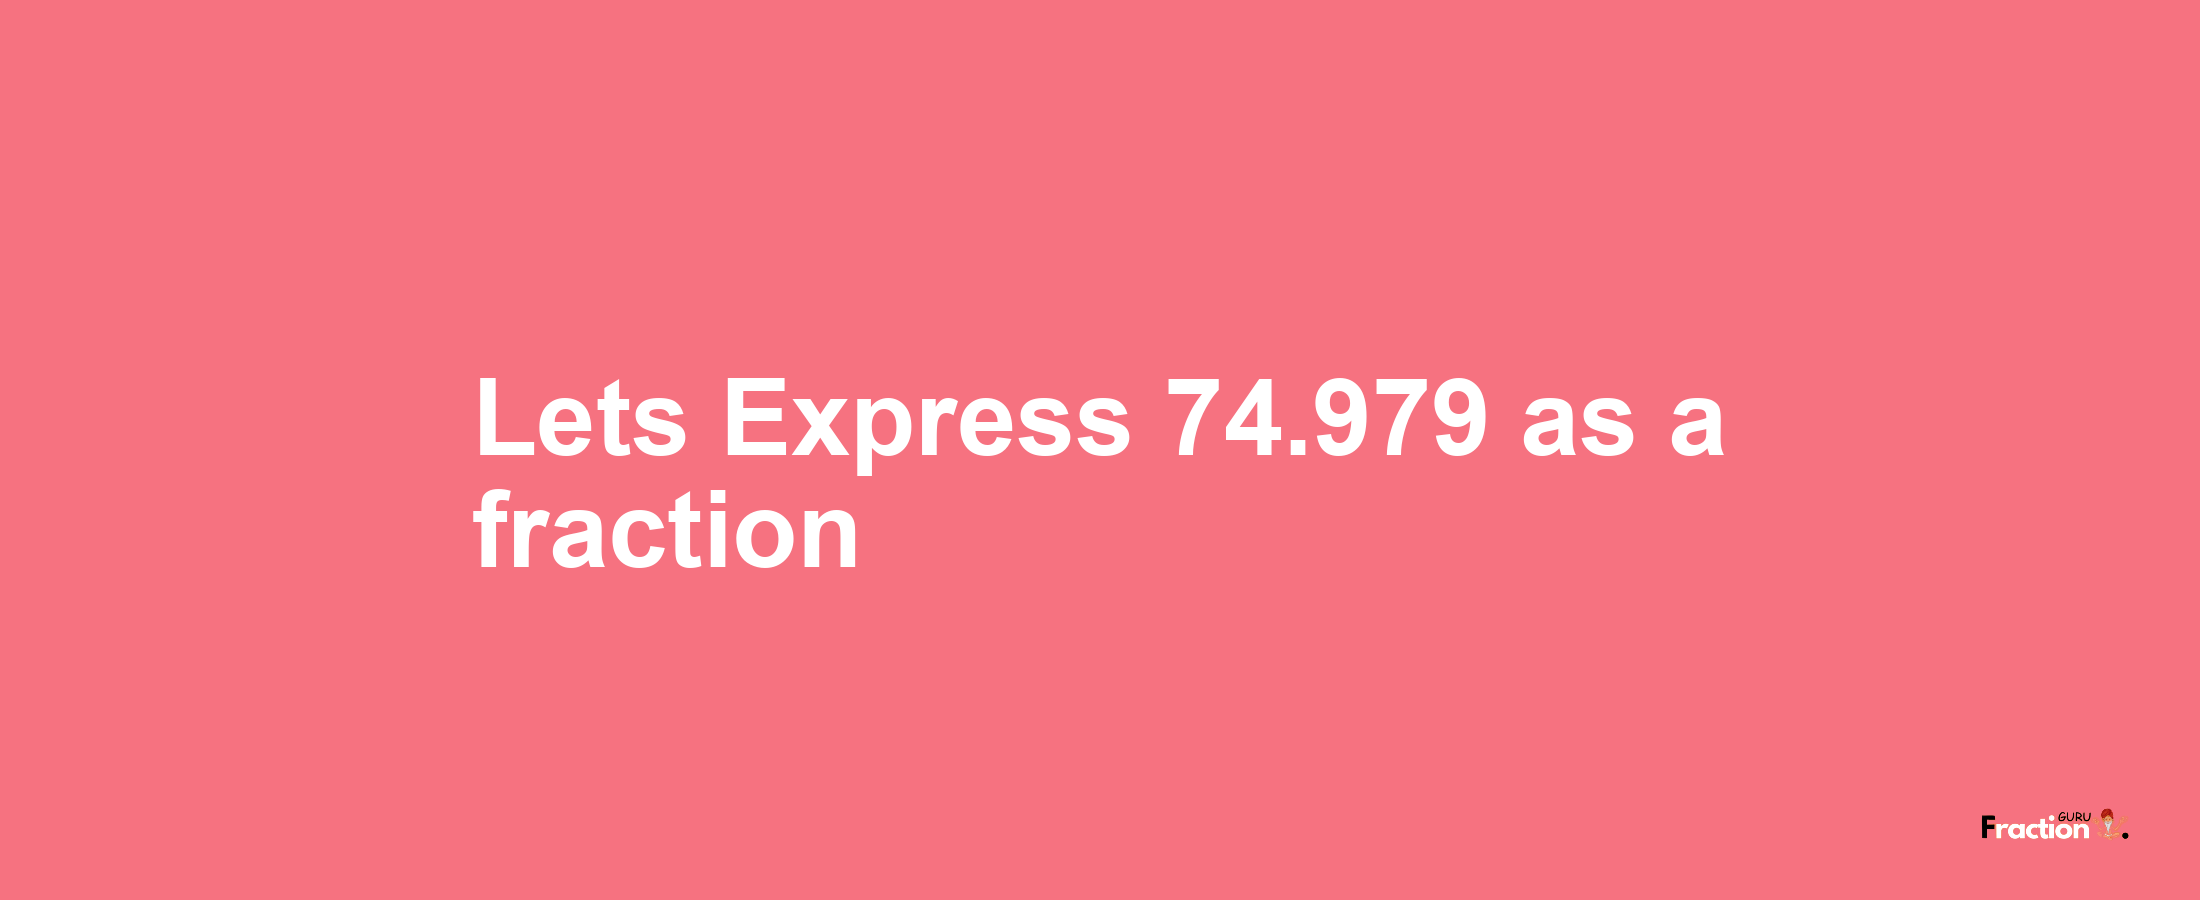 Lets Express 74.979 as afraction